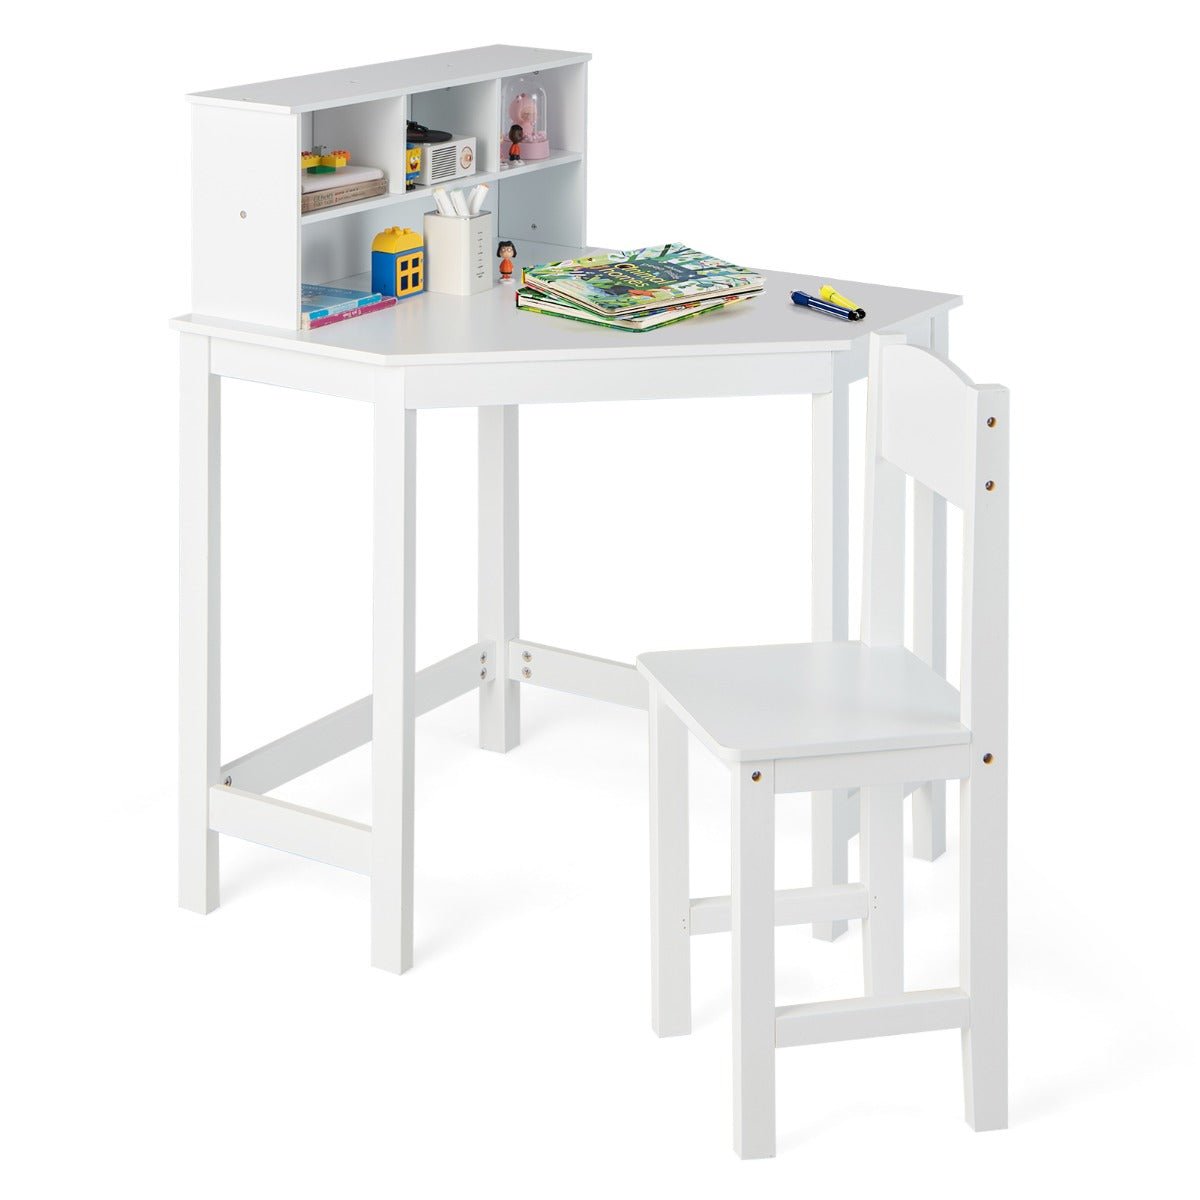 Kids Corner Desk & Chair Set: Inspire Learning and Creativity for Ages 3+